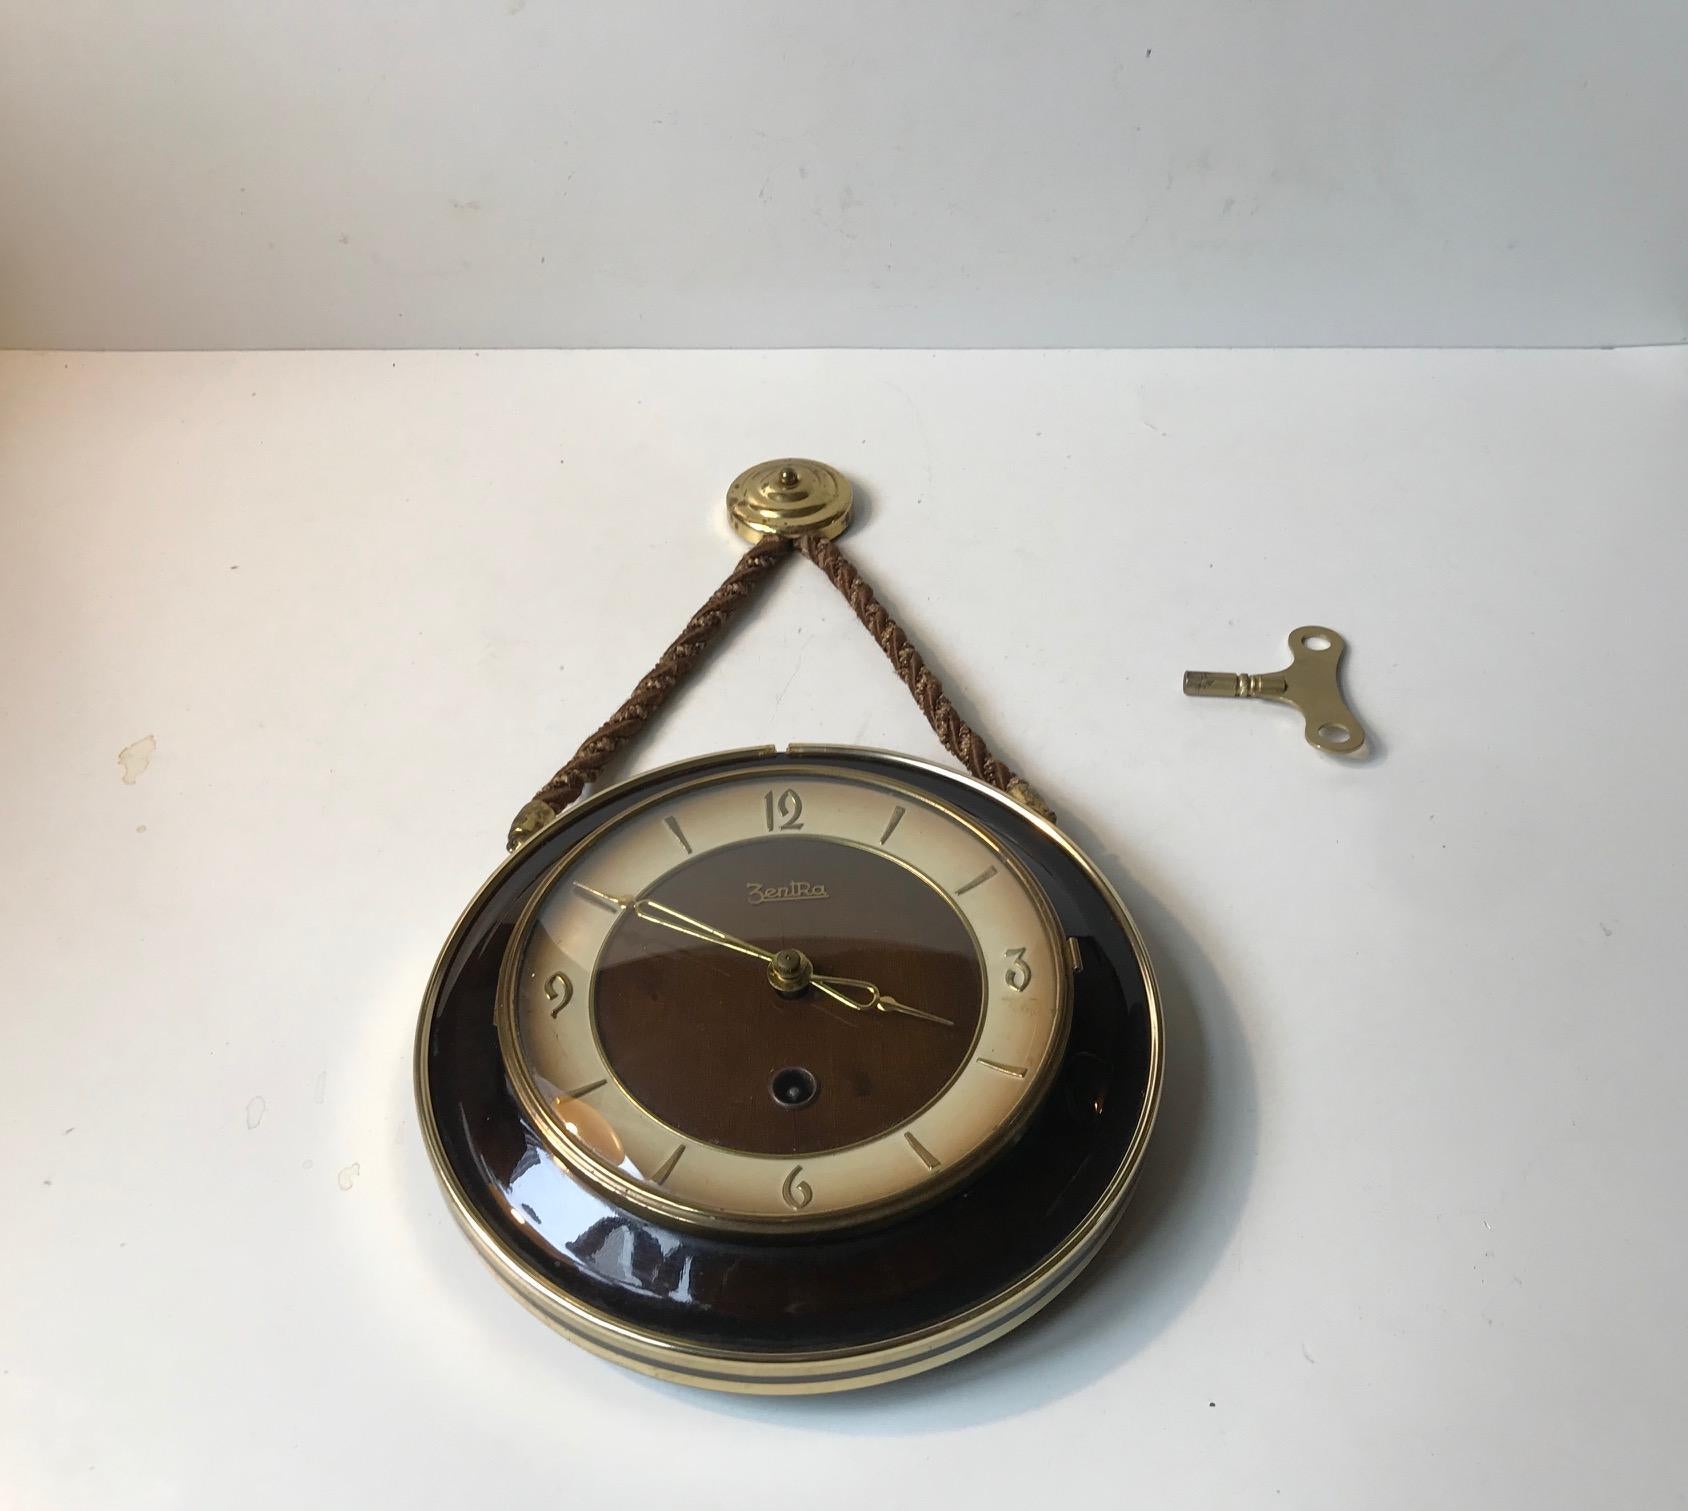 A Bauhaus styled wall clock with Manuel movement operated by key (included). Manufactured and designed by Zentra in Germany during the 1950s.